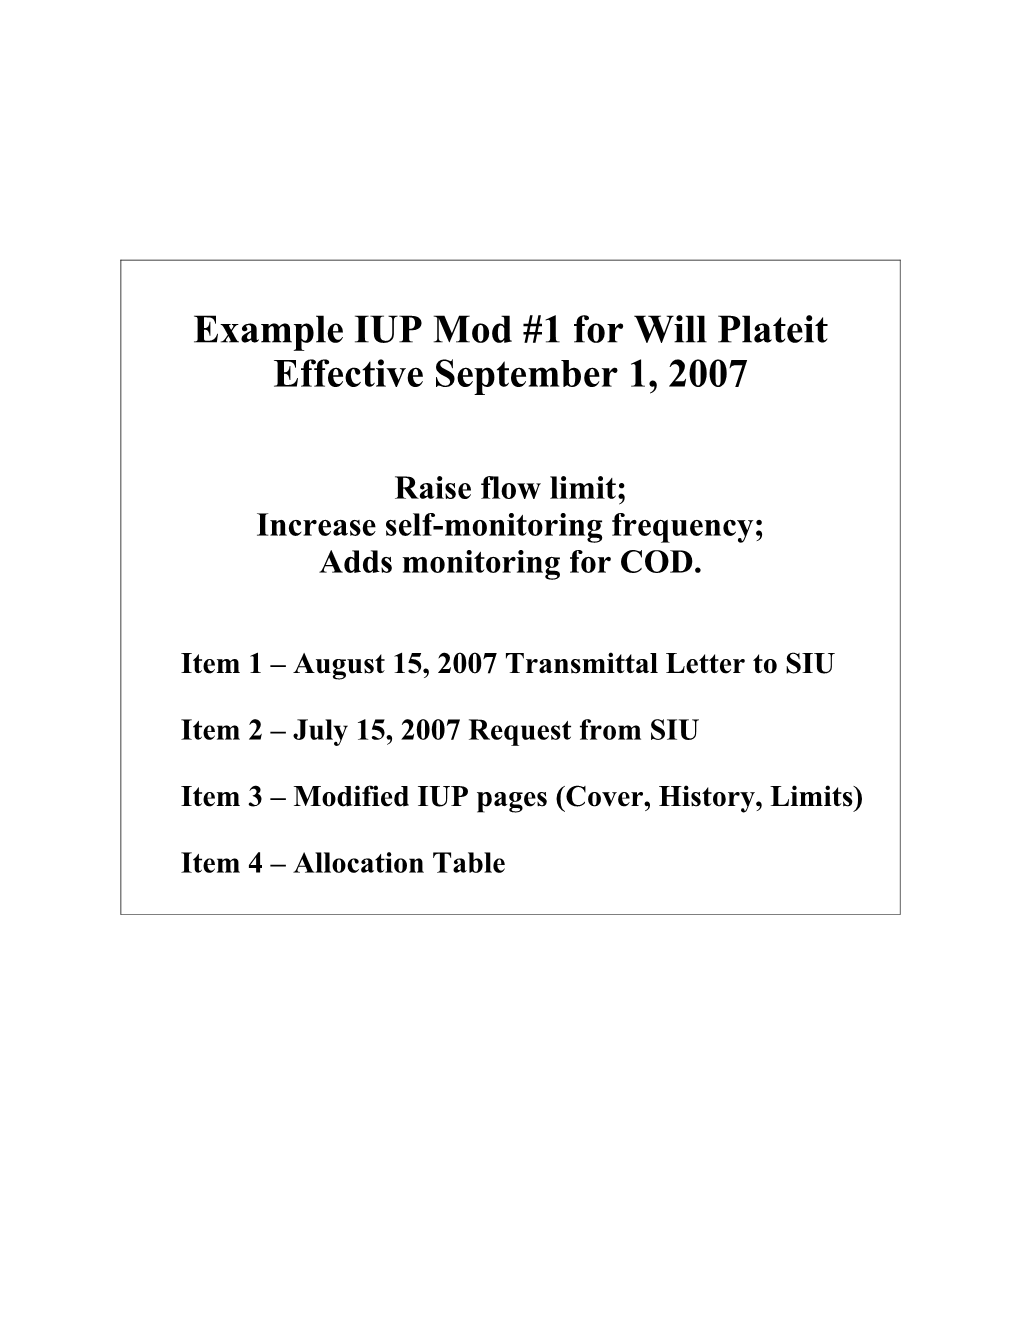 Example IUP Mod #1 for Will Plateit